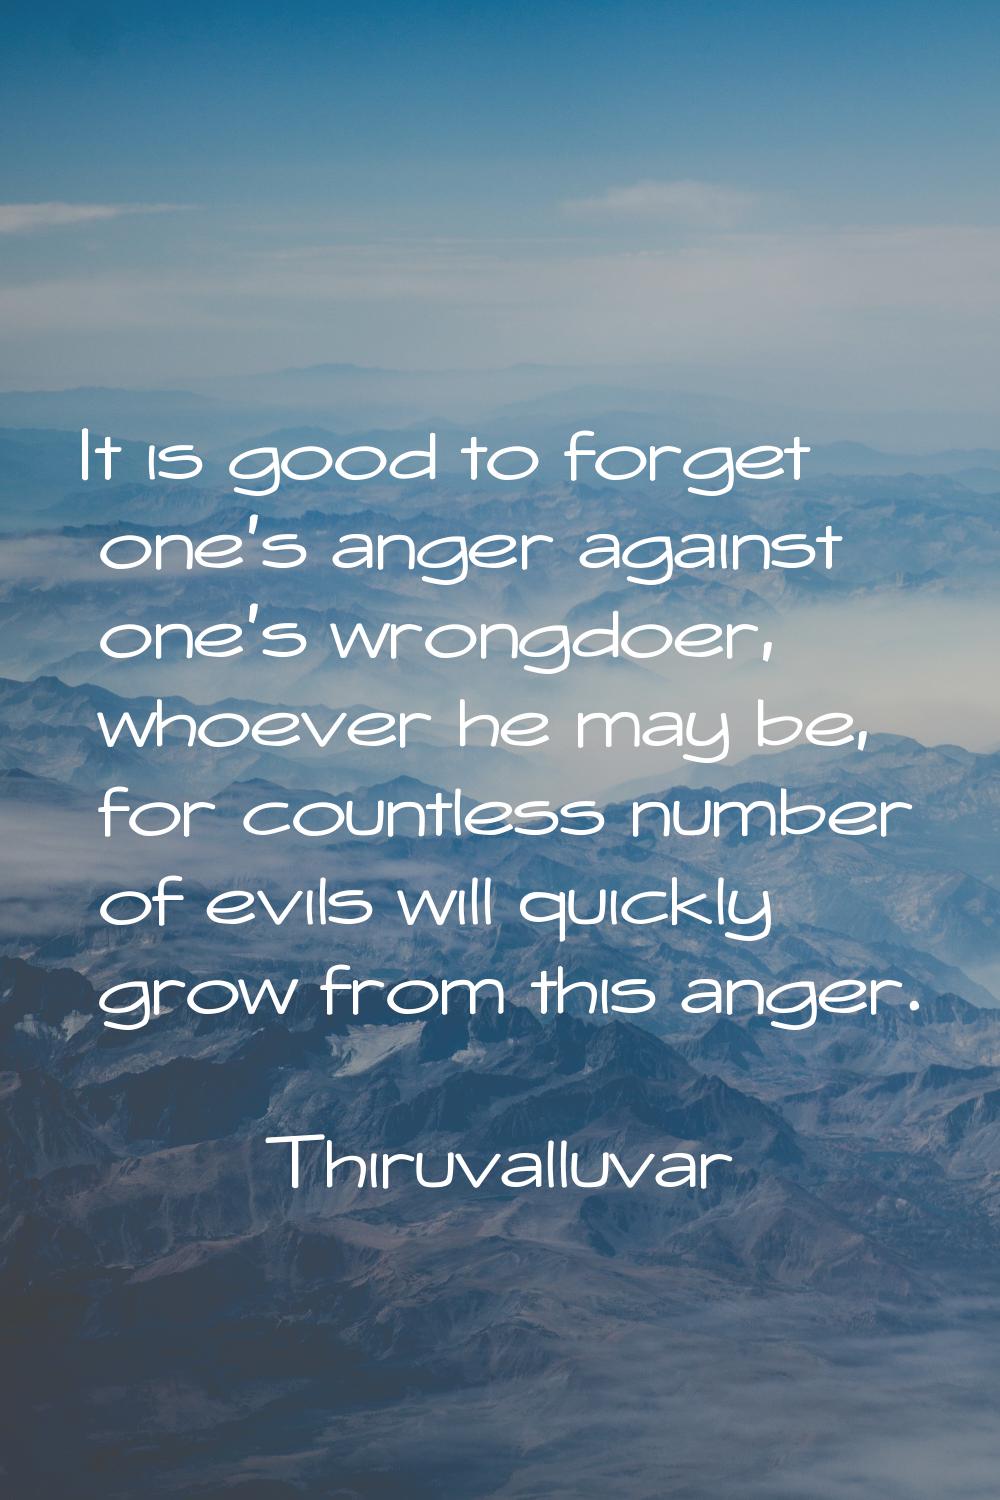 It is good to forget one's anger against one's wrongdoer, whoever he may be, for countless number o